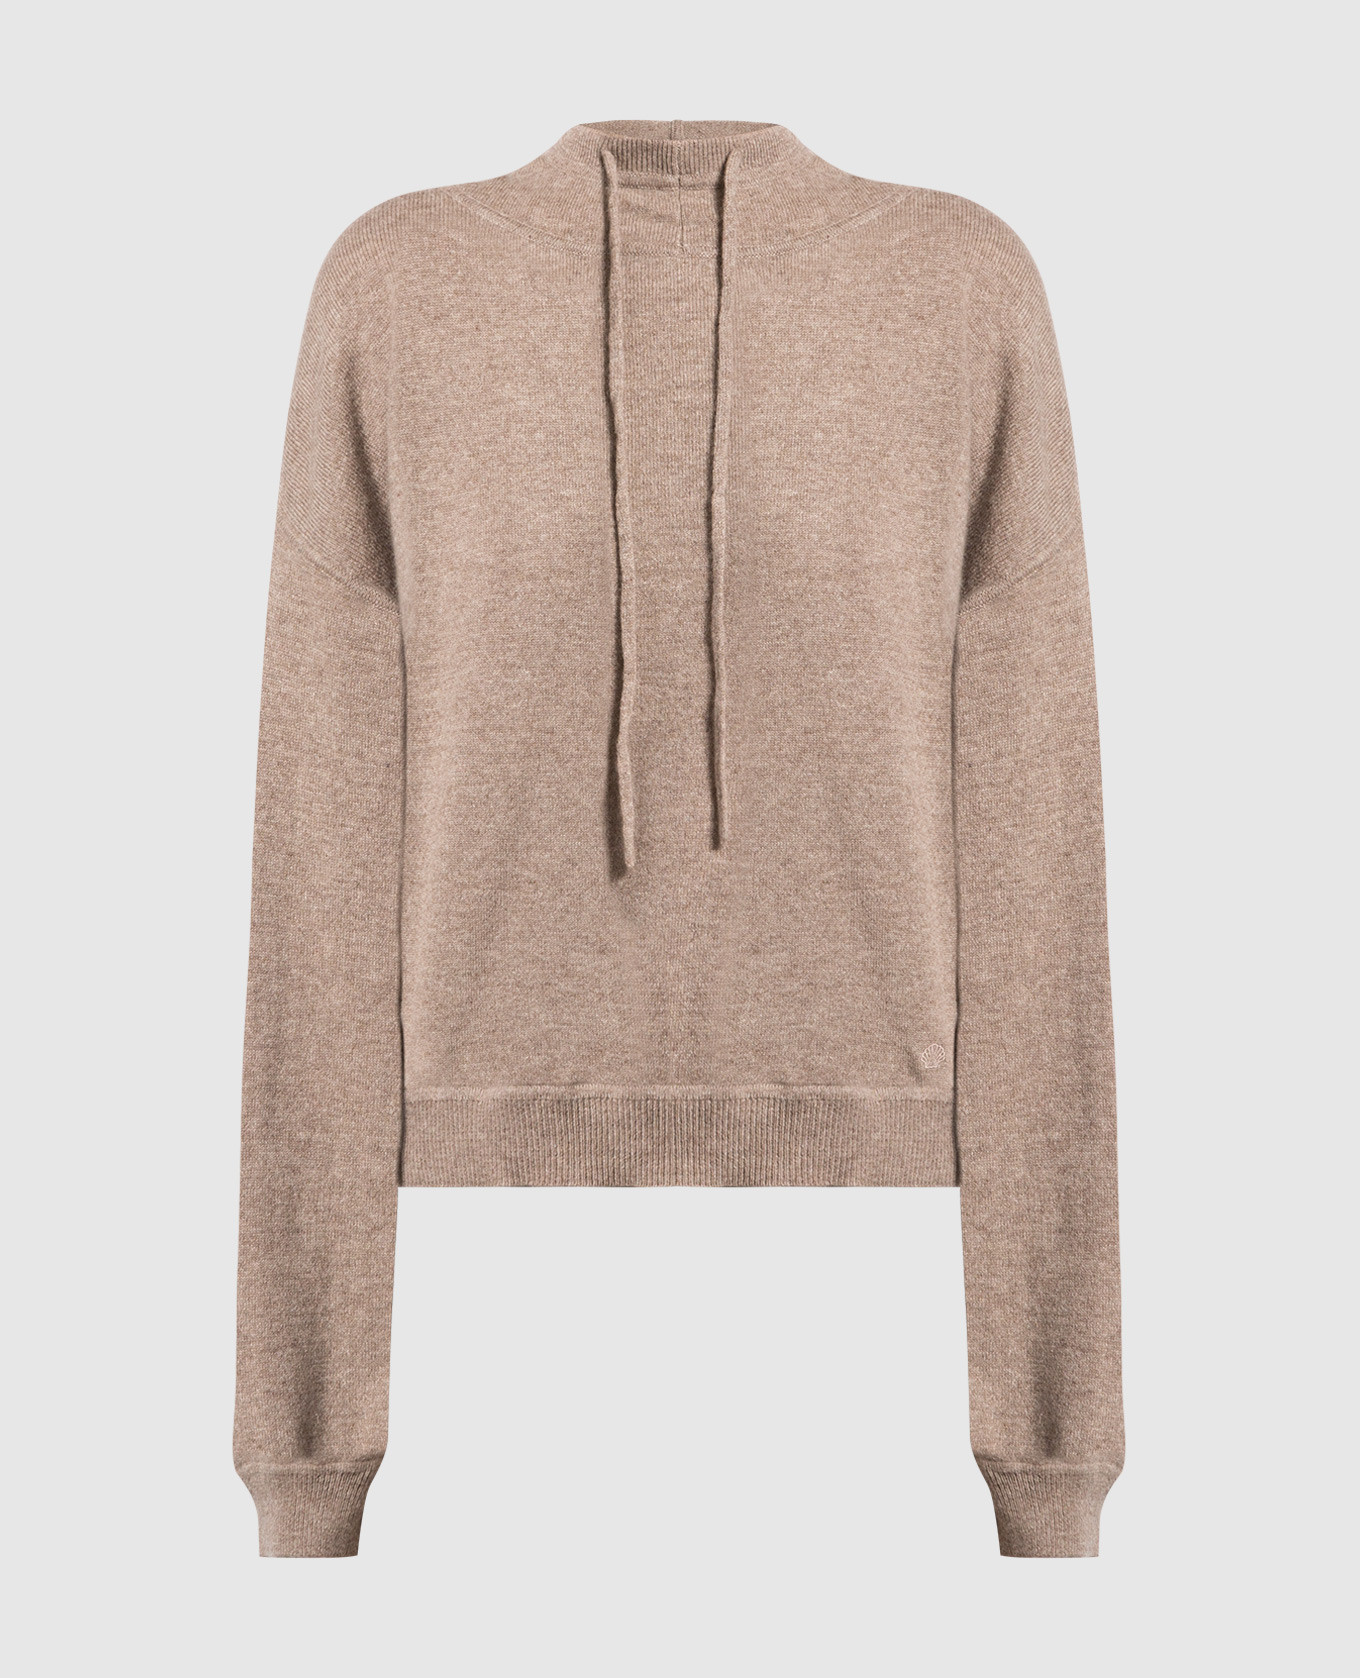 Brown cashmere hoodie